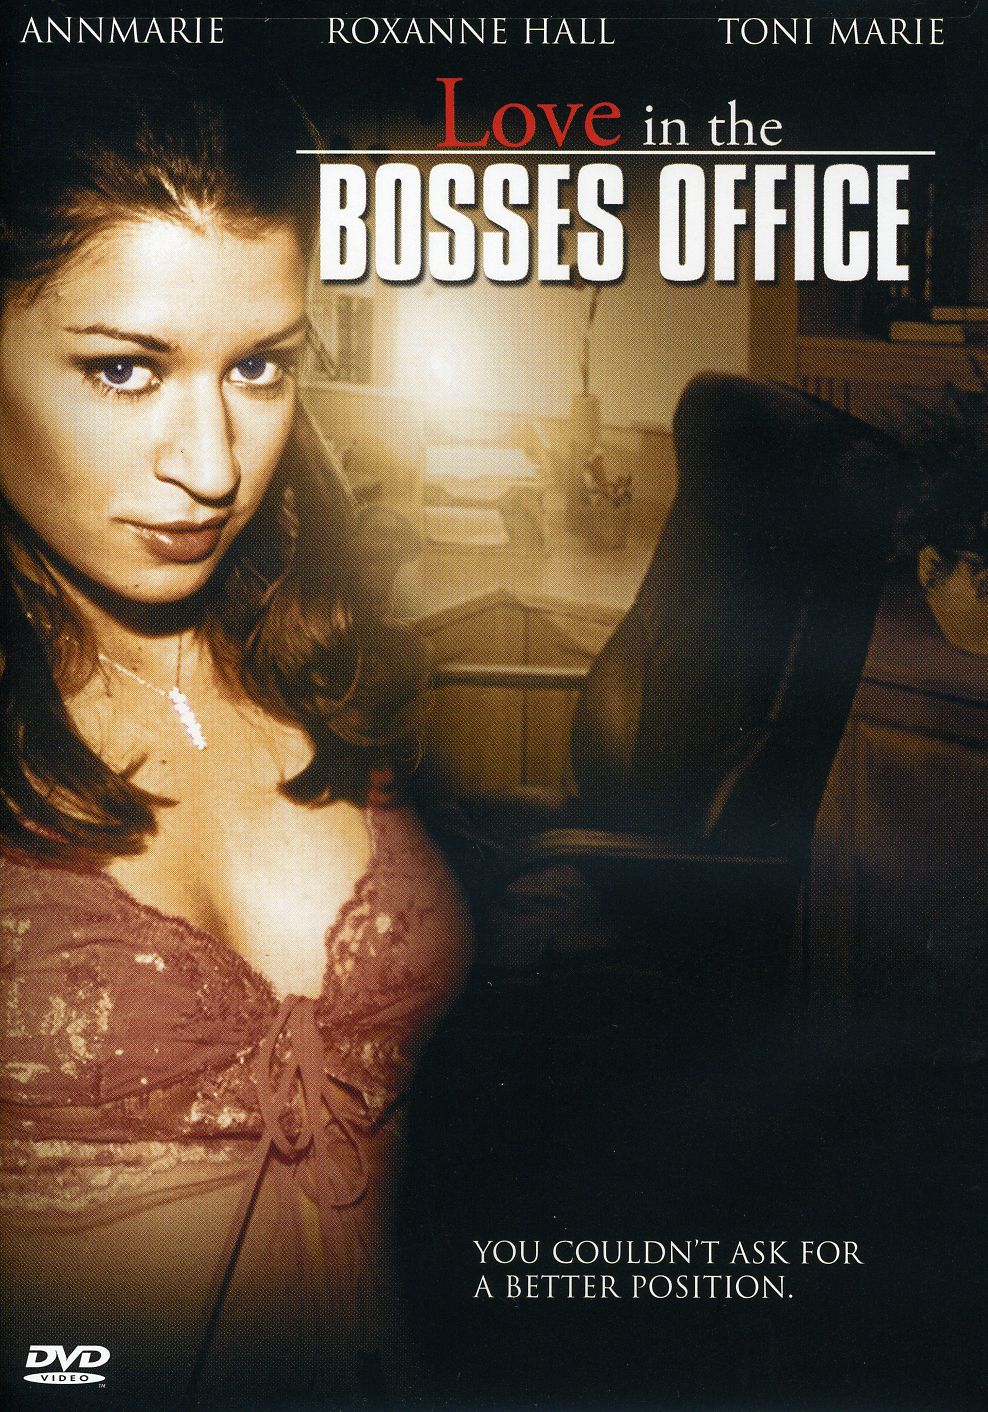 deborah woodhall recommends love in bosses office pic